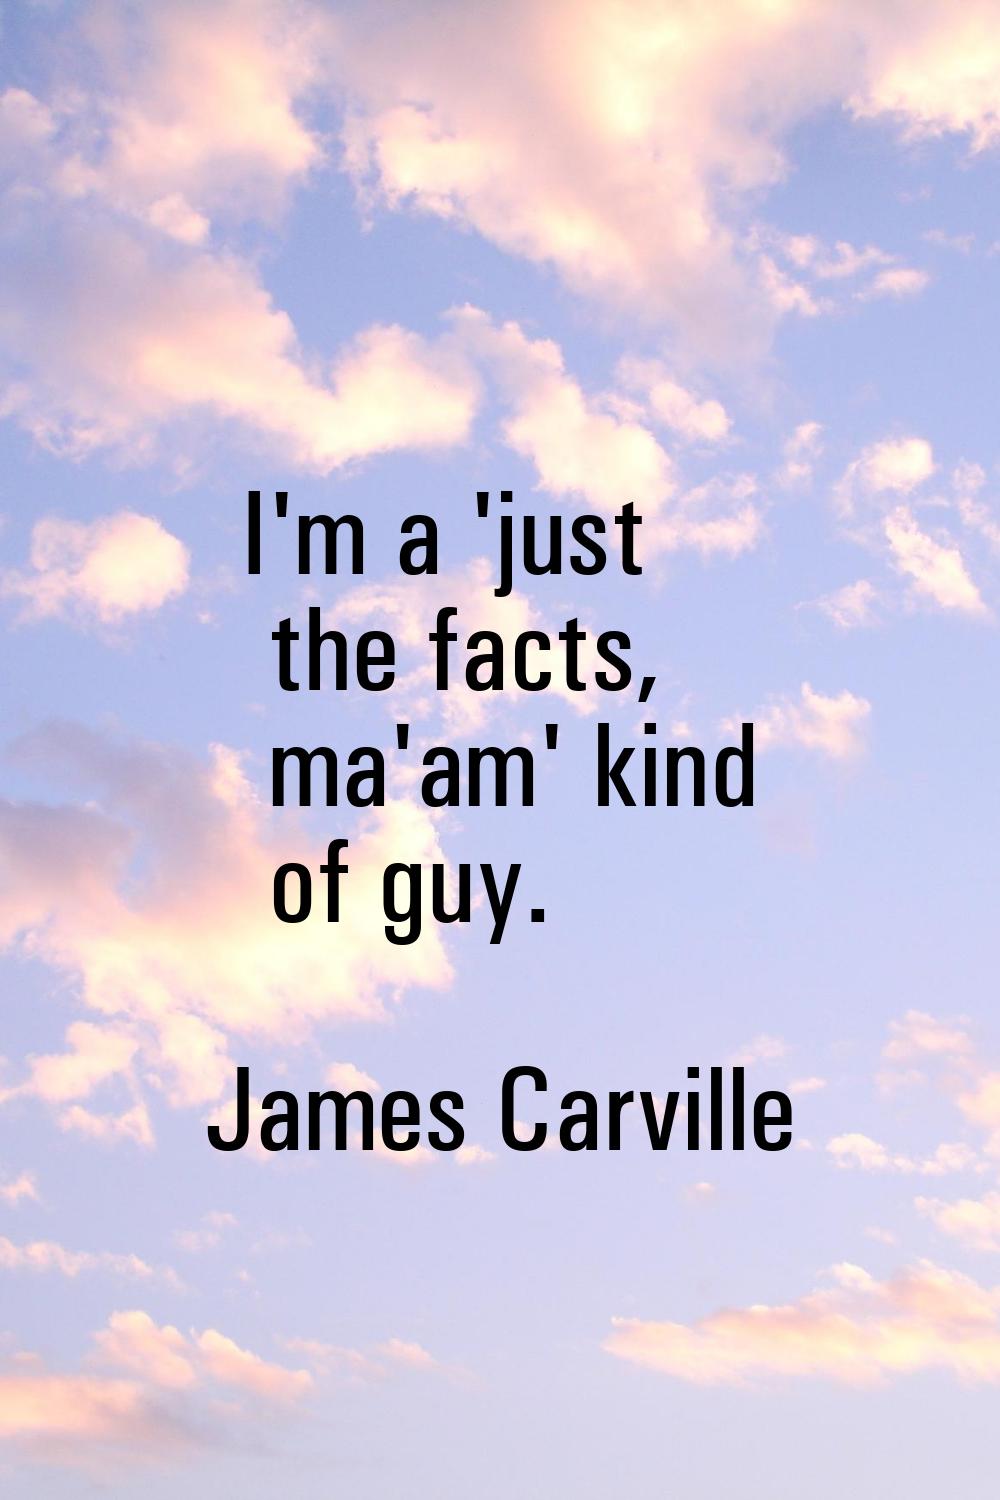 I'm a 'just the facts, ma'am' kind of guy.